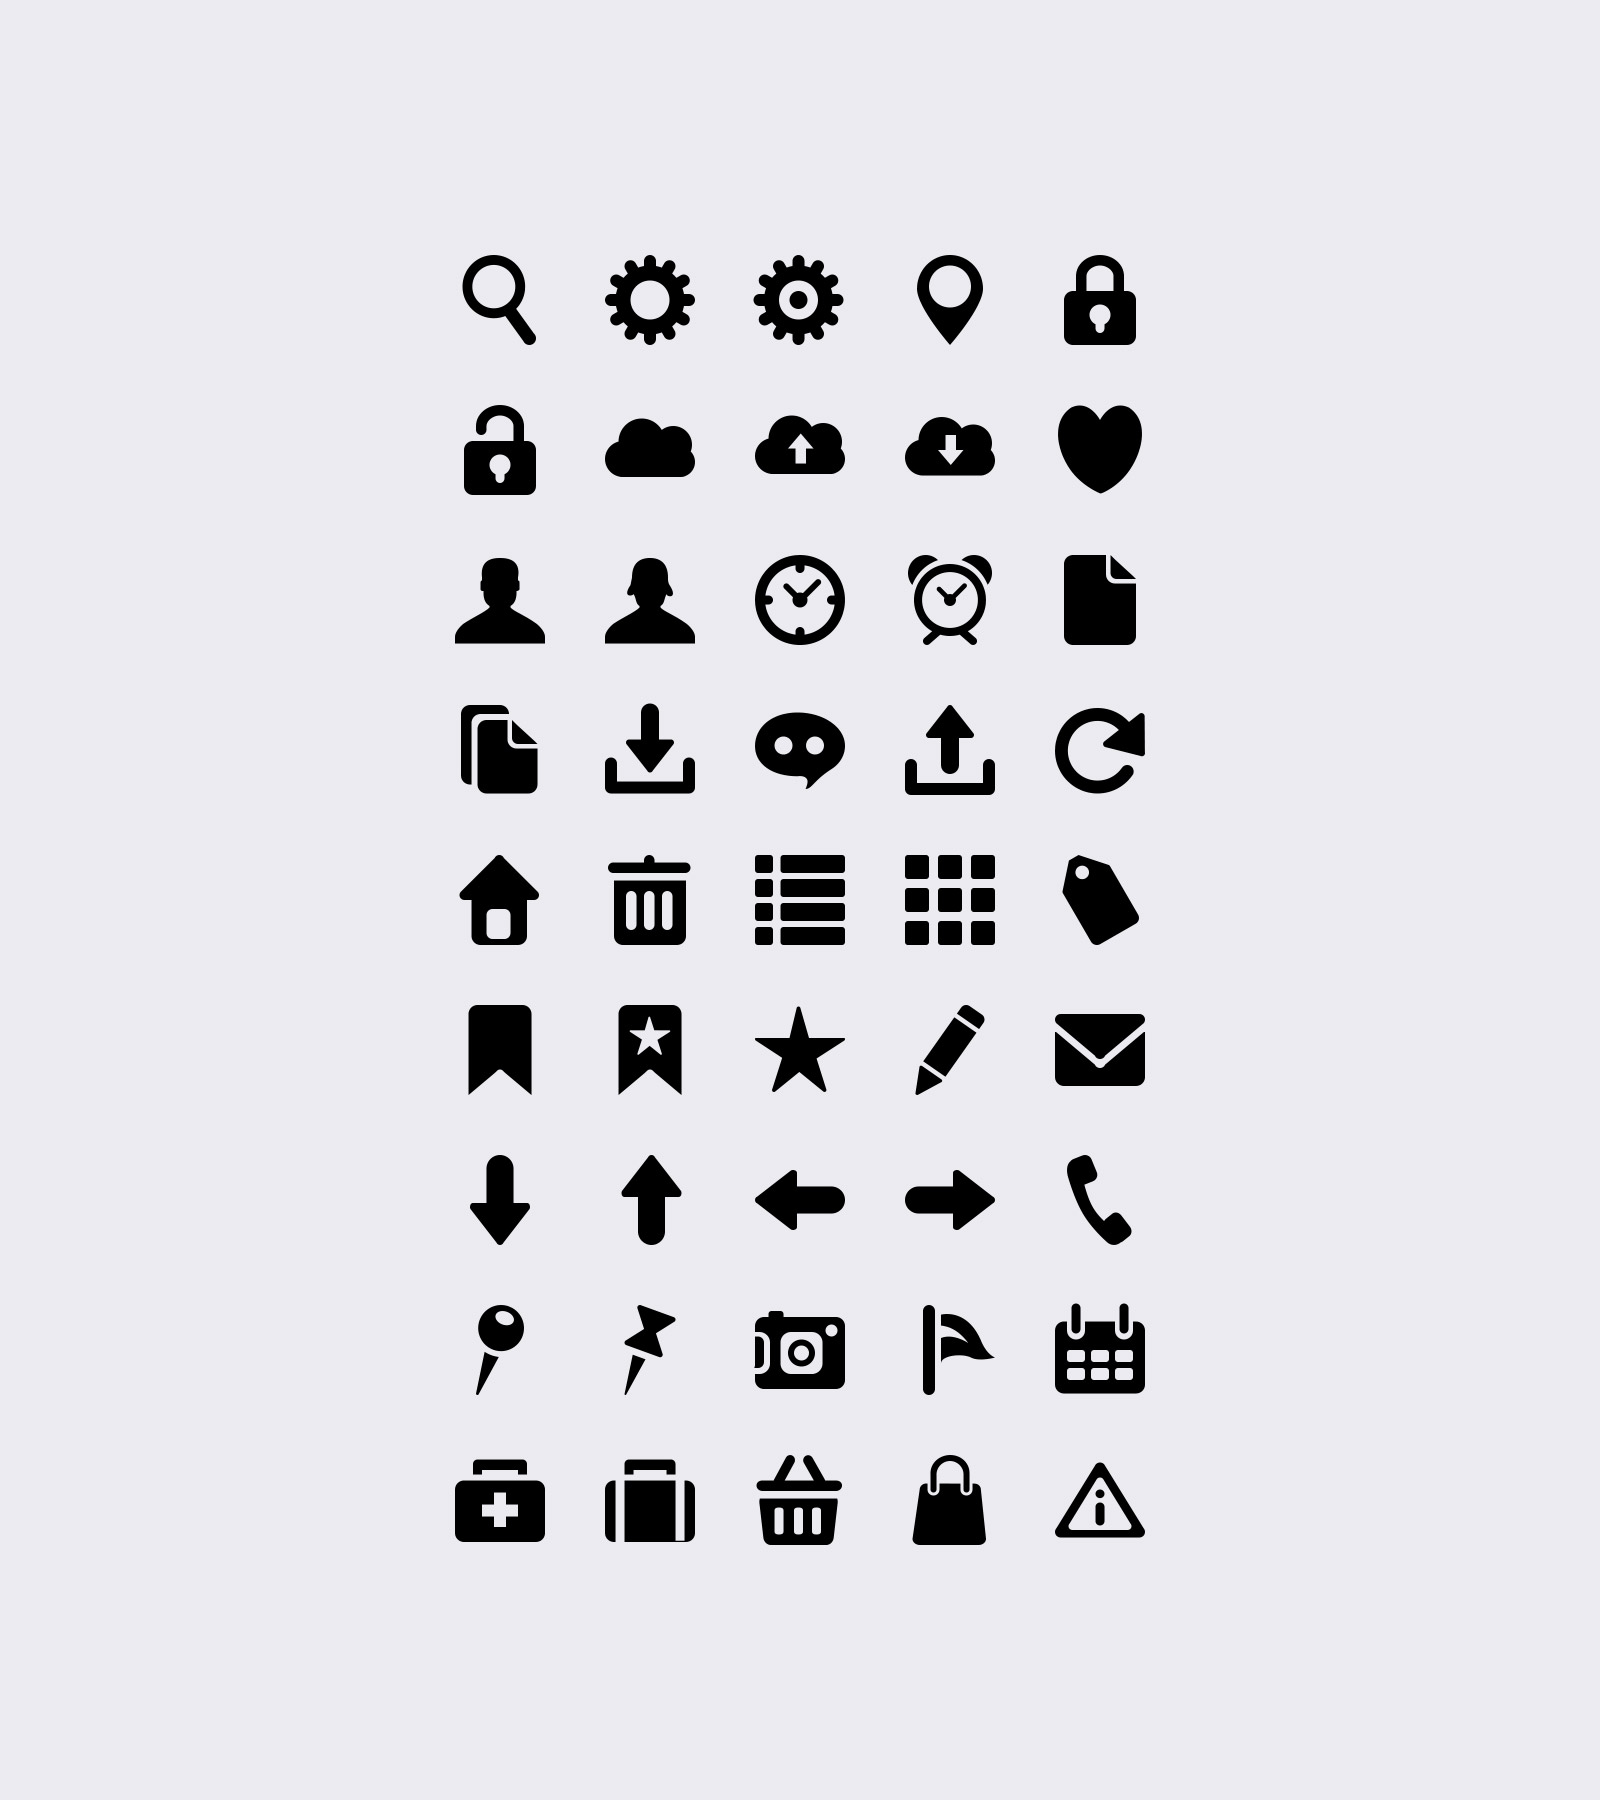 iphone icons vector